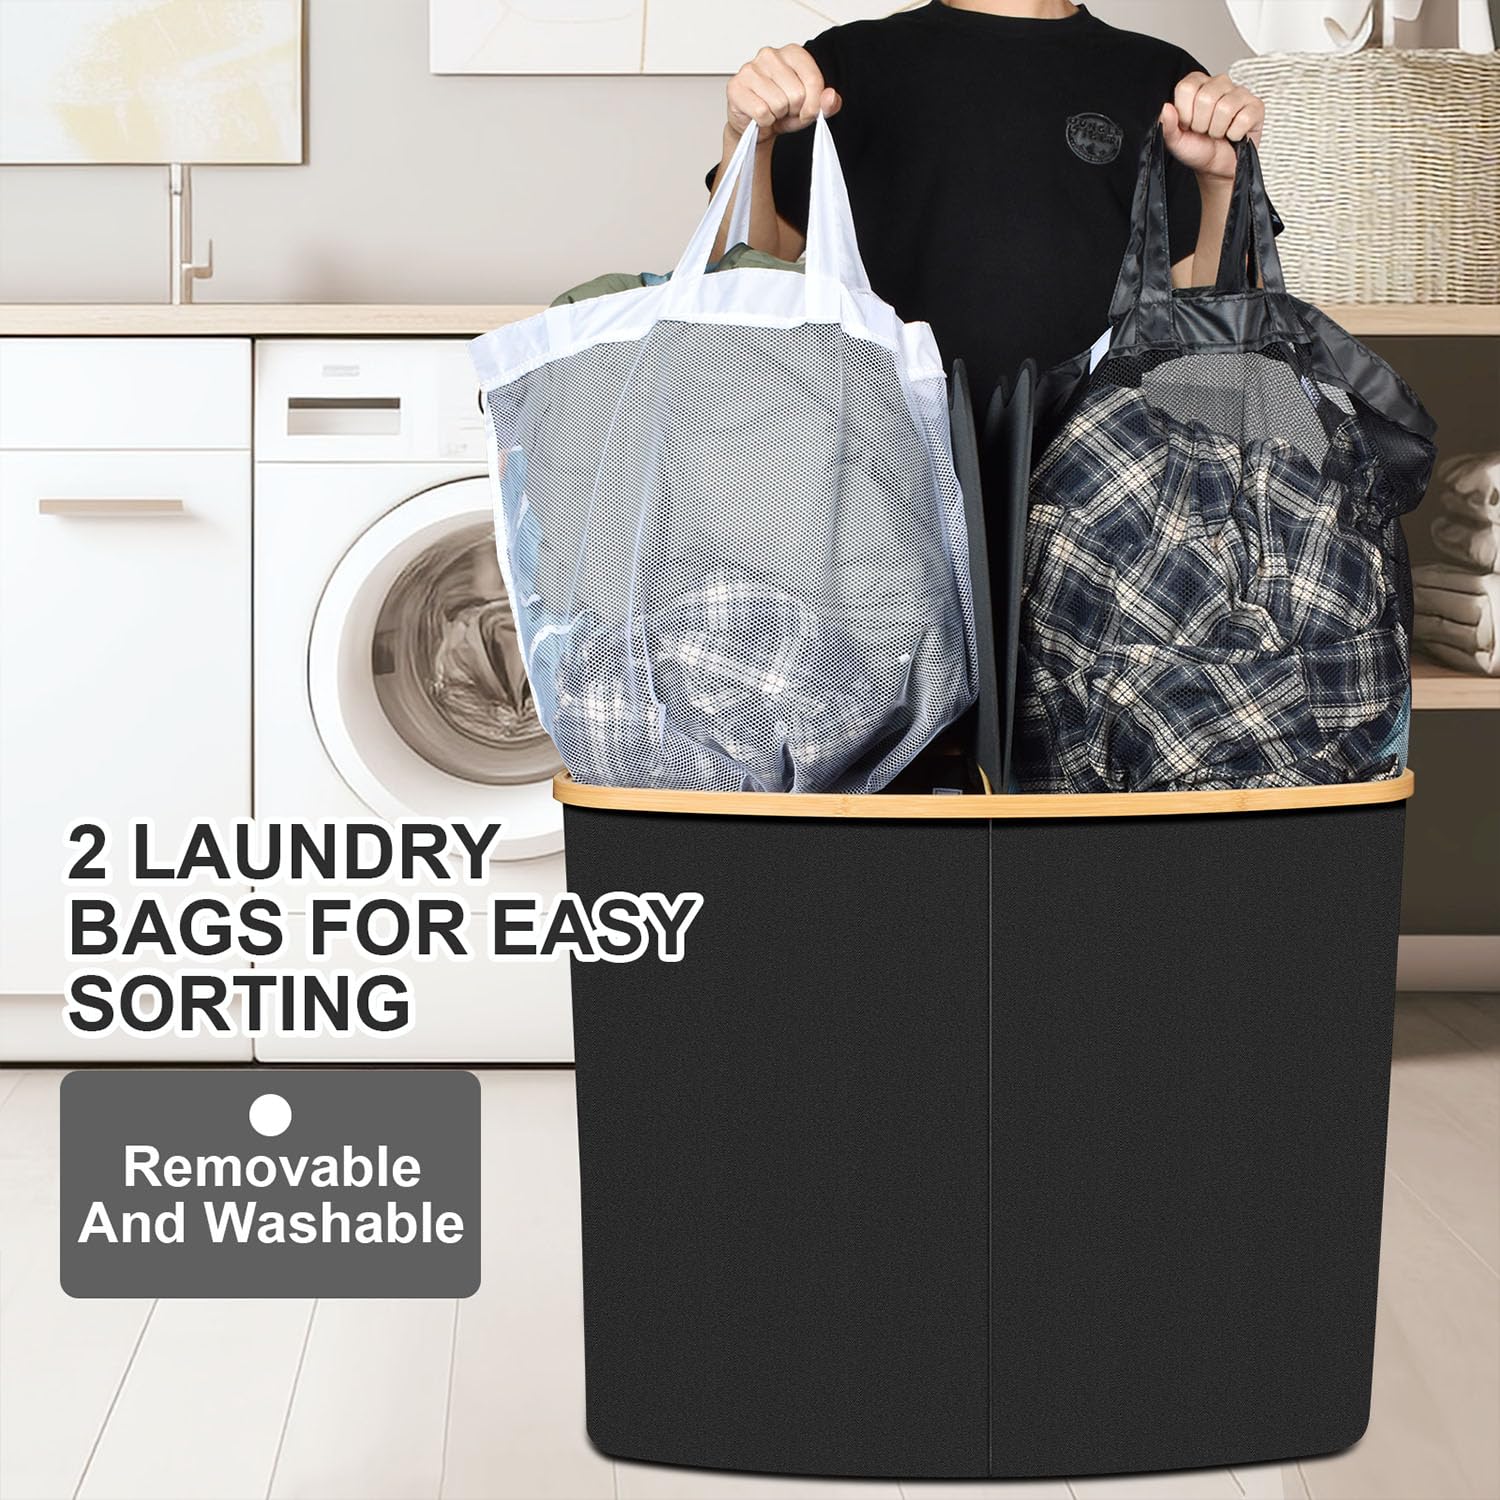 LEVIPE Large Laundry Basket with Lid, 205L Collapsible Laundry Hamper with Inner Bags 2 Section Dirty Clothes Hamper, Laundry Basket Organizer for Bathroom, Bedroom & Laundry Room